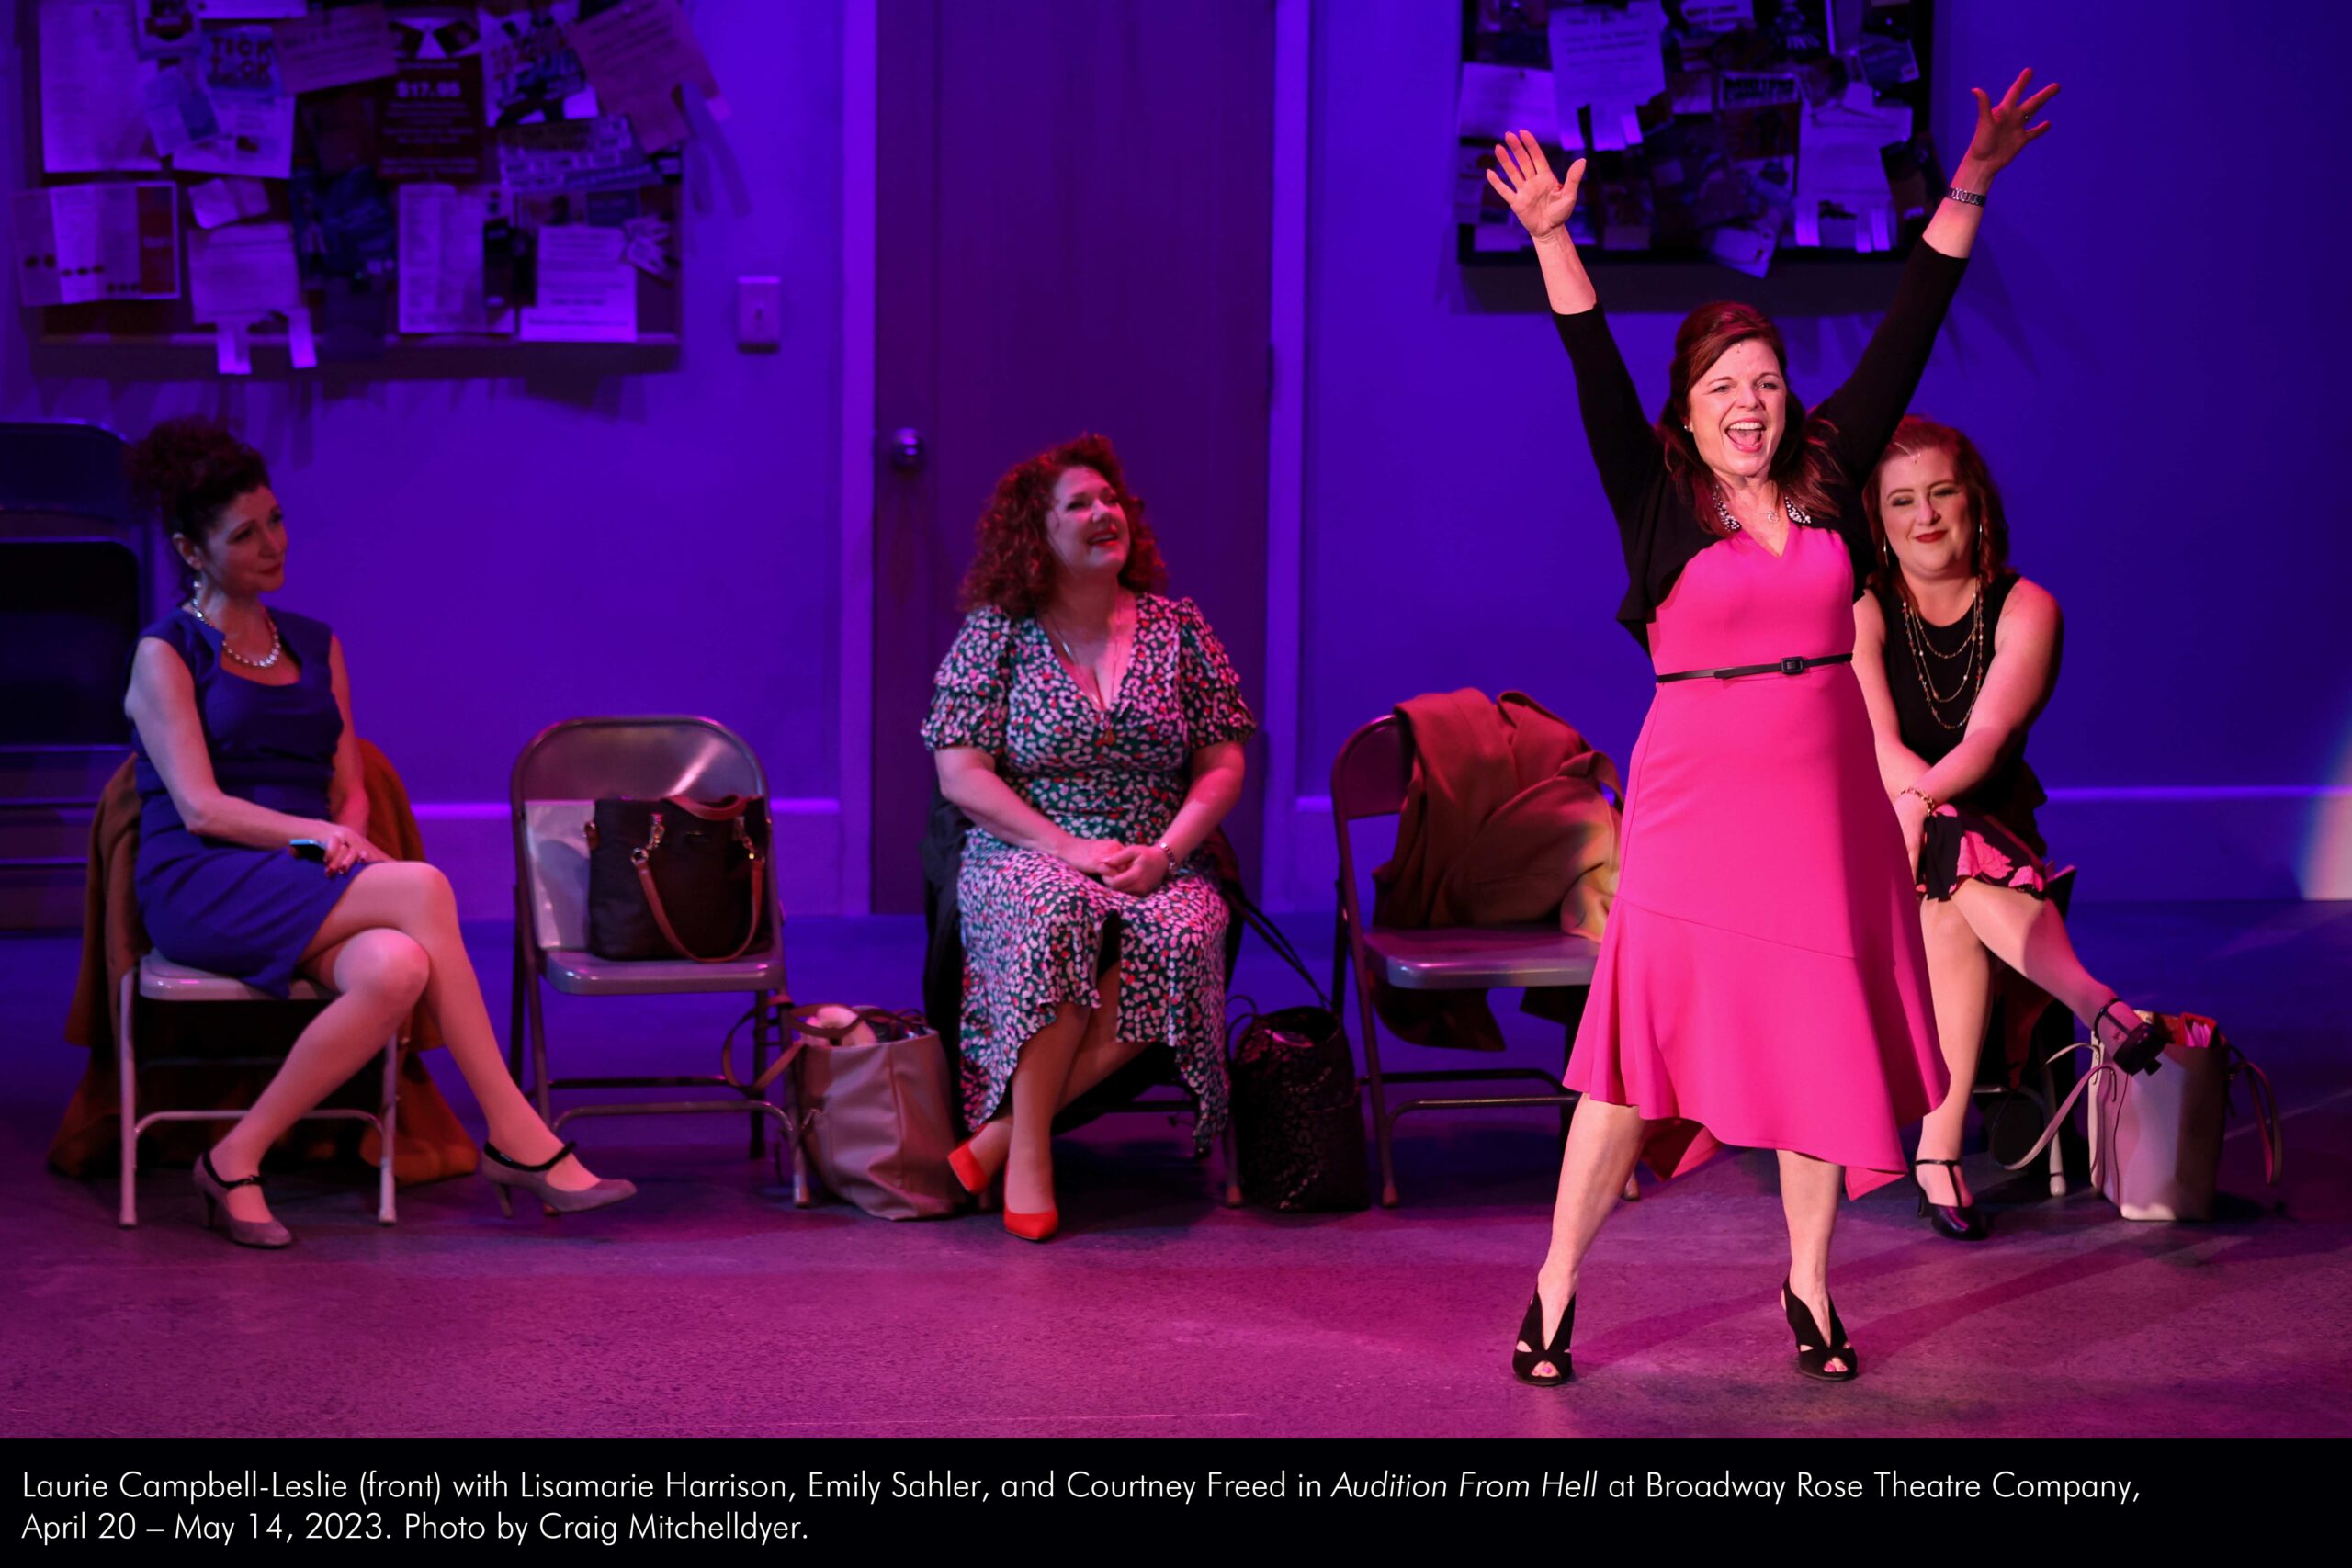 Laurie Campbell-Leslie (front) with Lisamarie Harrison, Emily Sahler, and Courtney Freed in Audition From Hell at Broadway Rose Theatre Company. April 20 through May 14, 2023. Photo by Craig Mitchelldyer